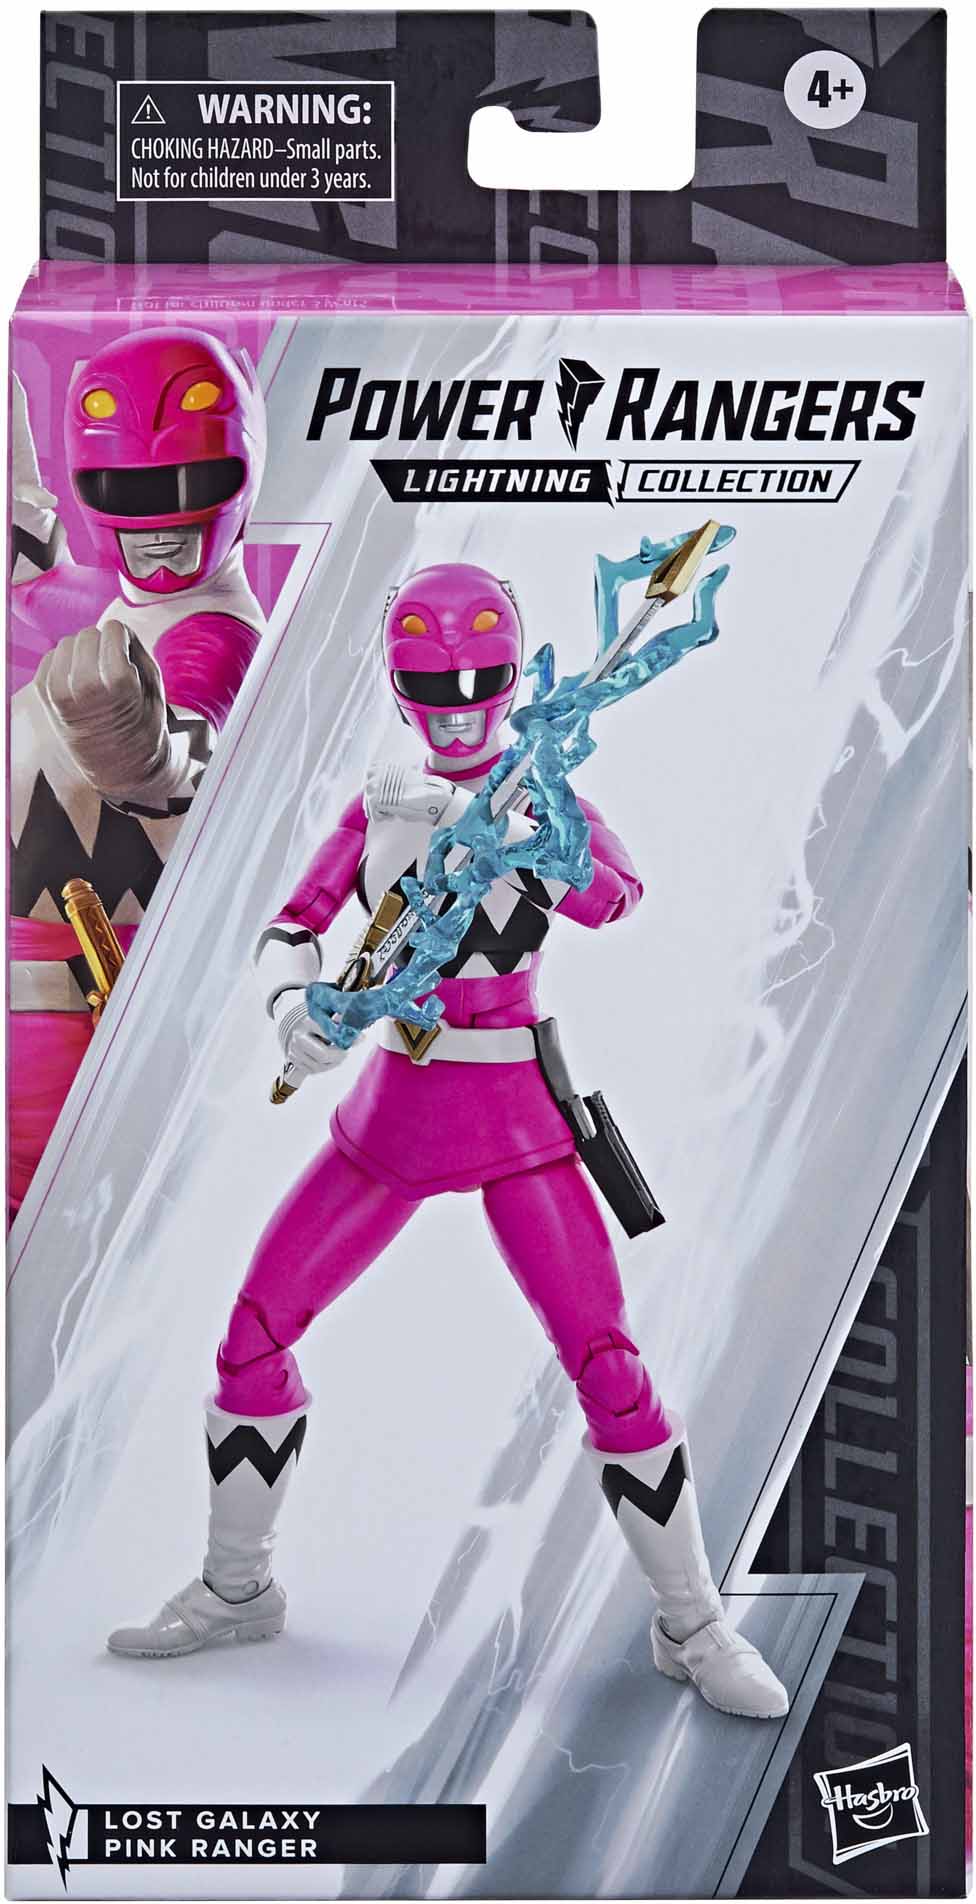 Power Rangers Lightning Collection 6 Inch Action Figure Wave 14 - Lost Galaxy Pink Ranger